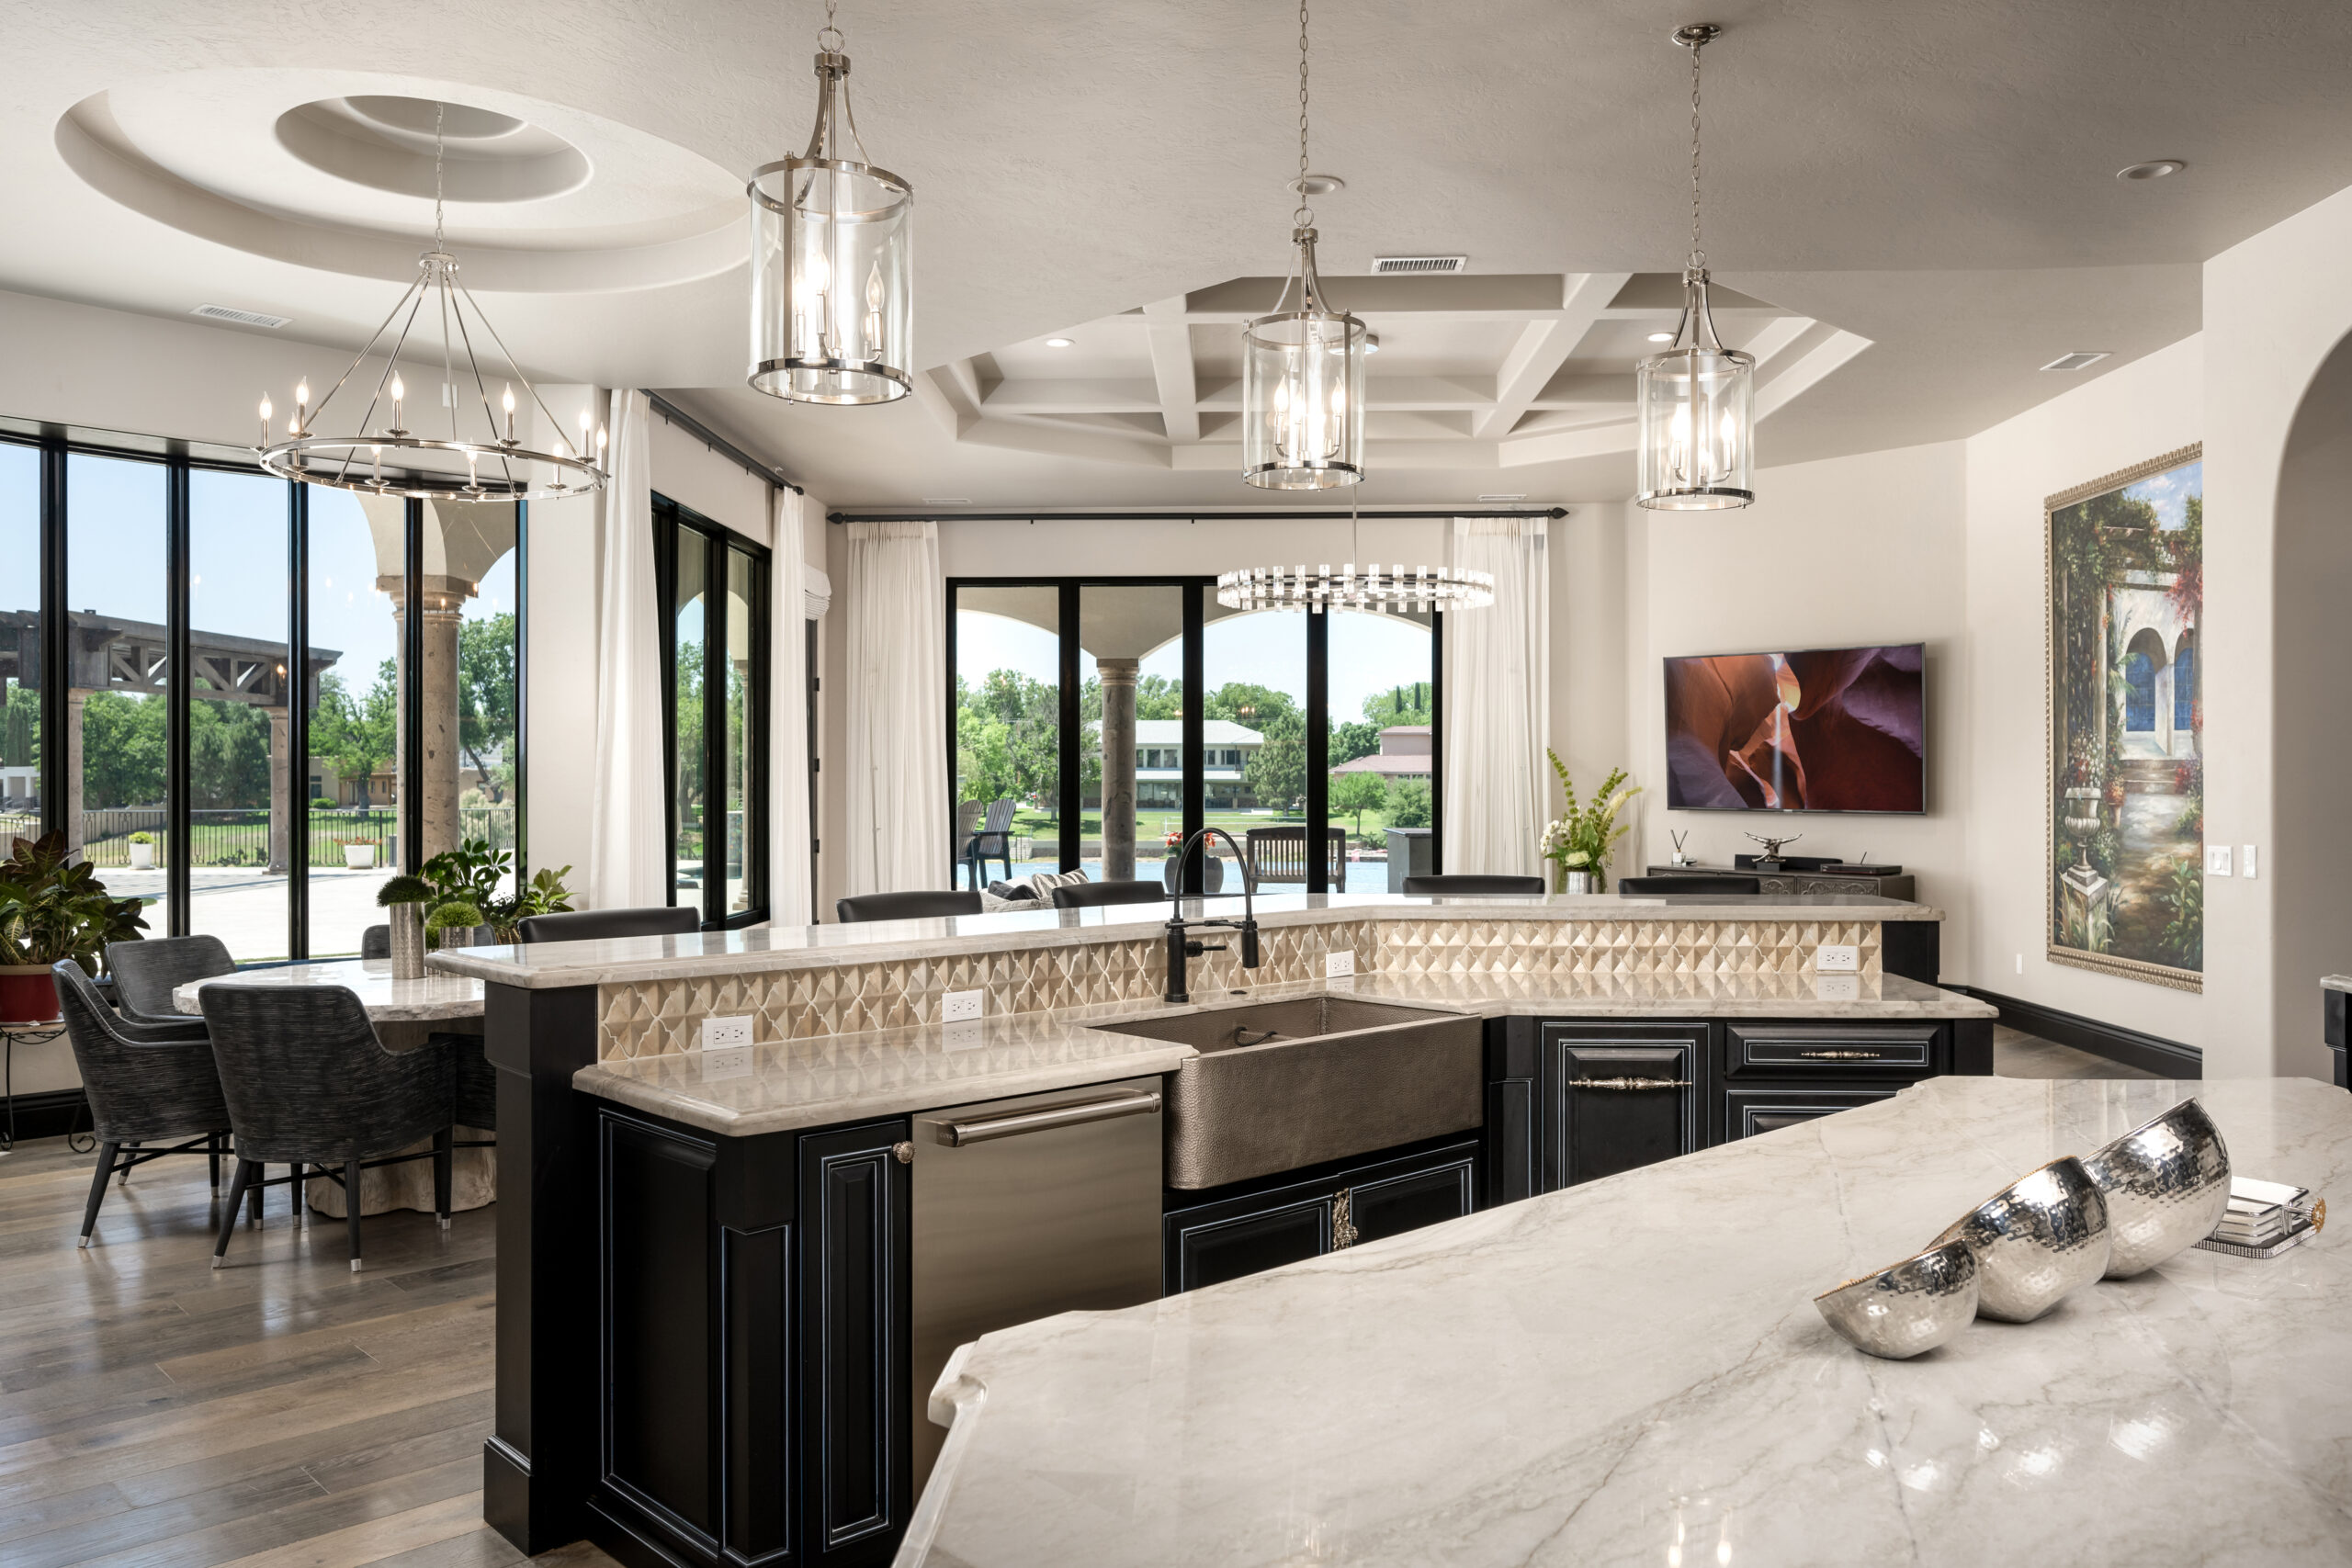 Contemporary kitchen design featuring pendant light fixtures and chandeliers